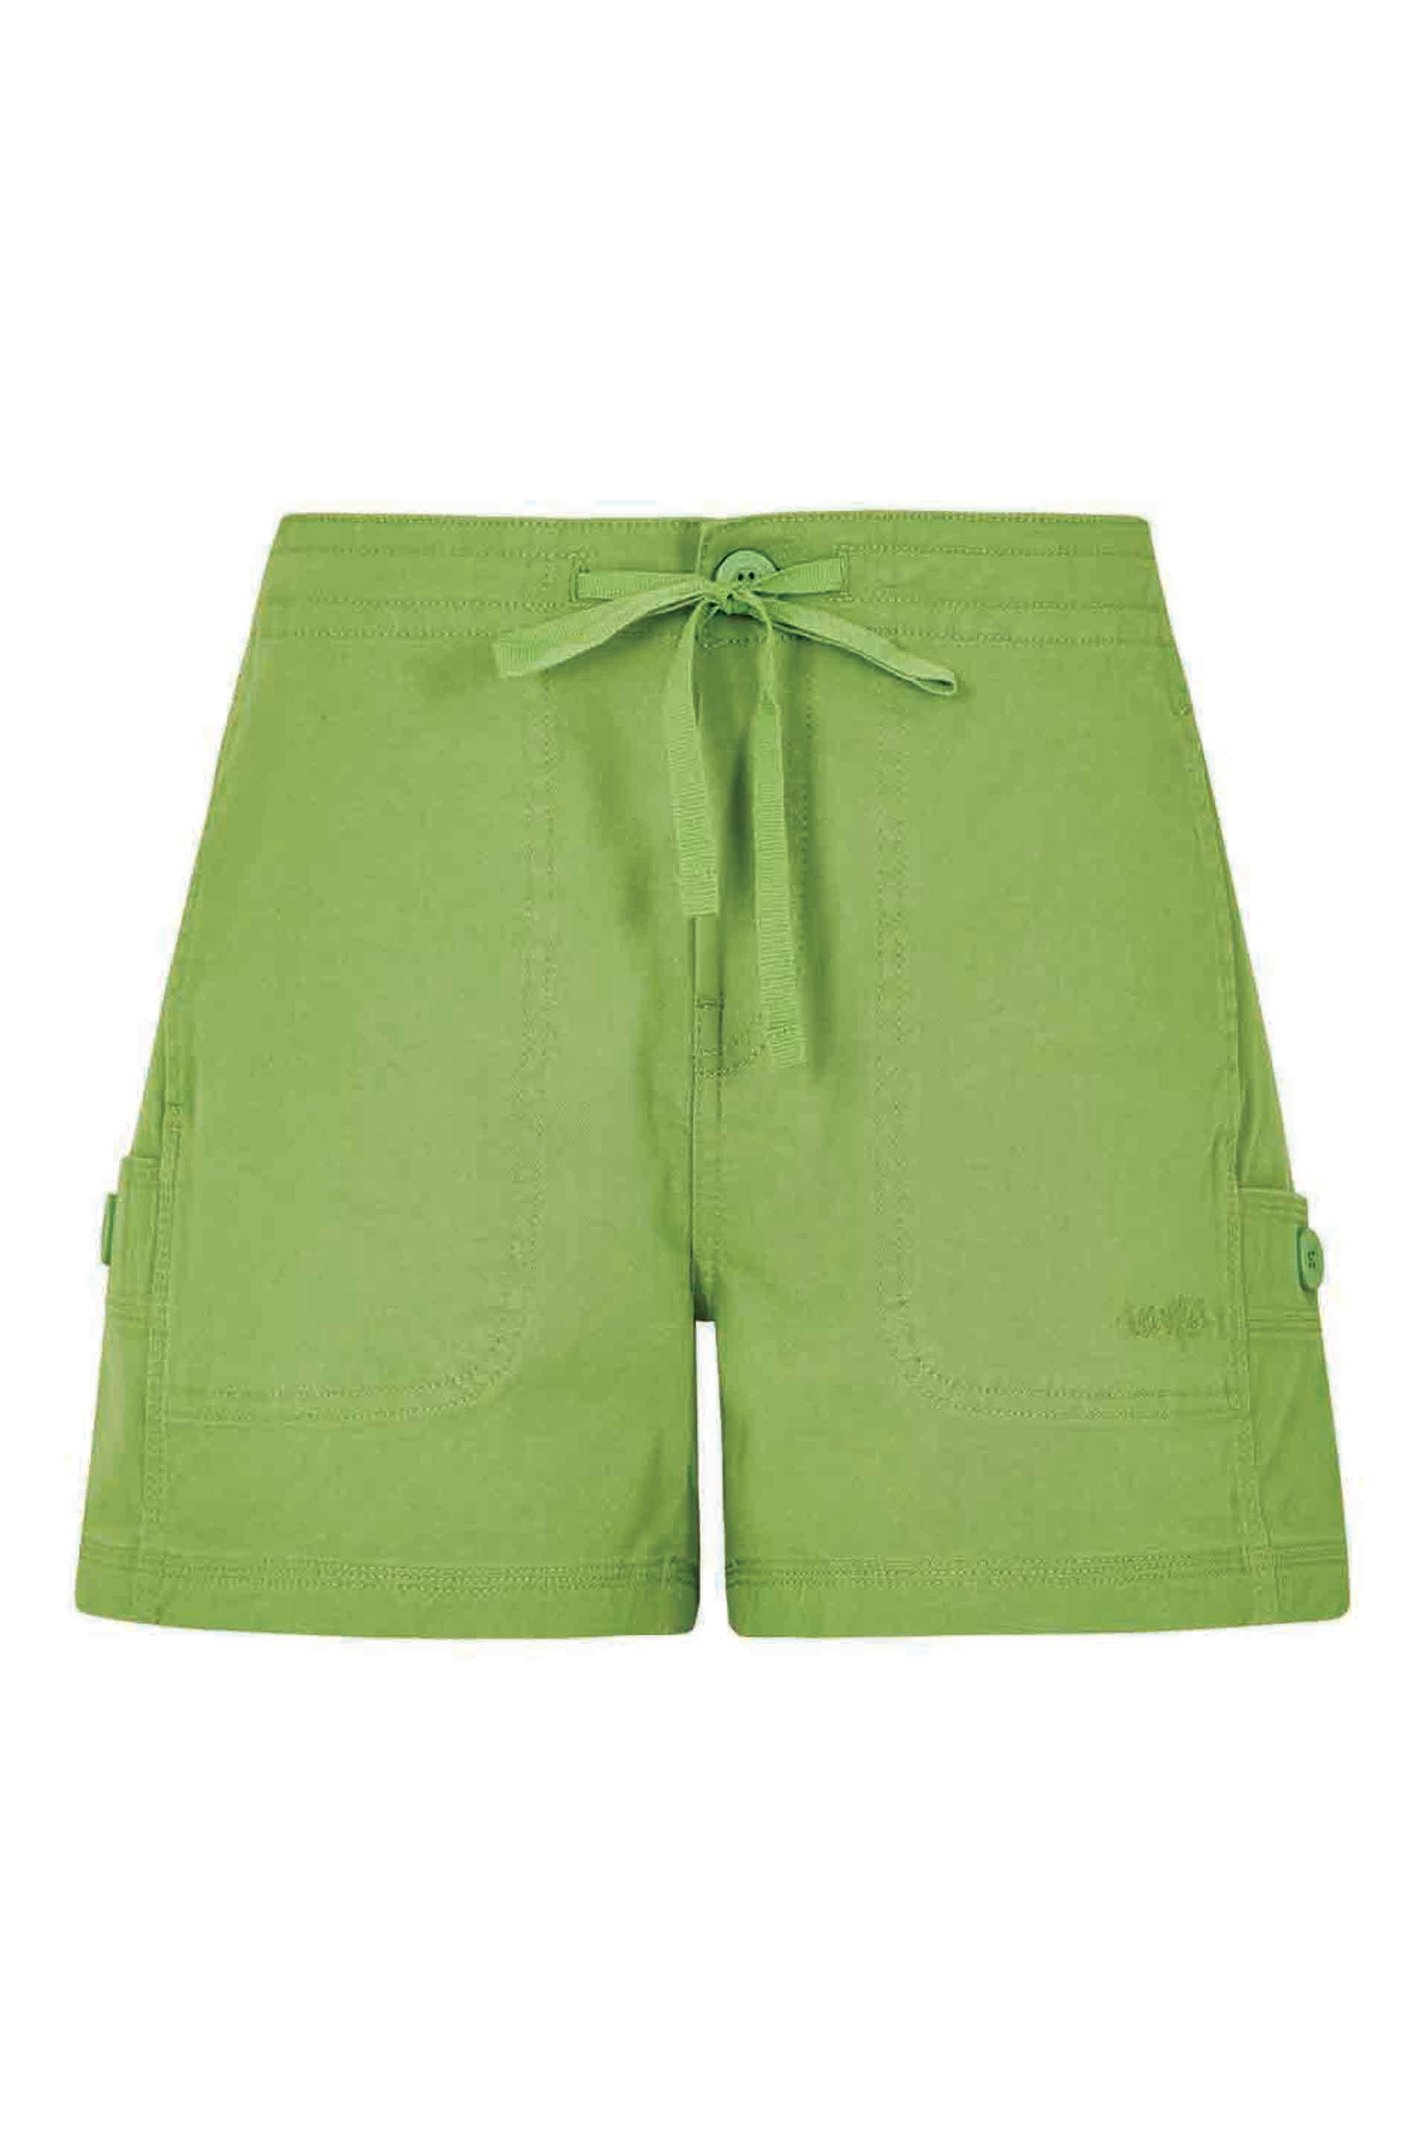 Weird Fish Willoughby Summer Shorts Kiwi Size 20